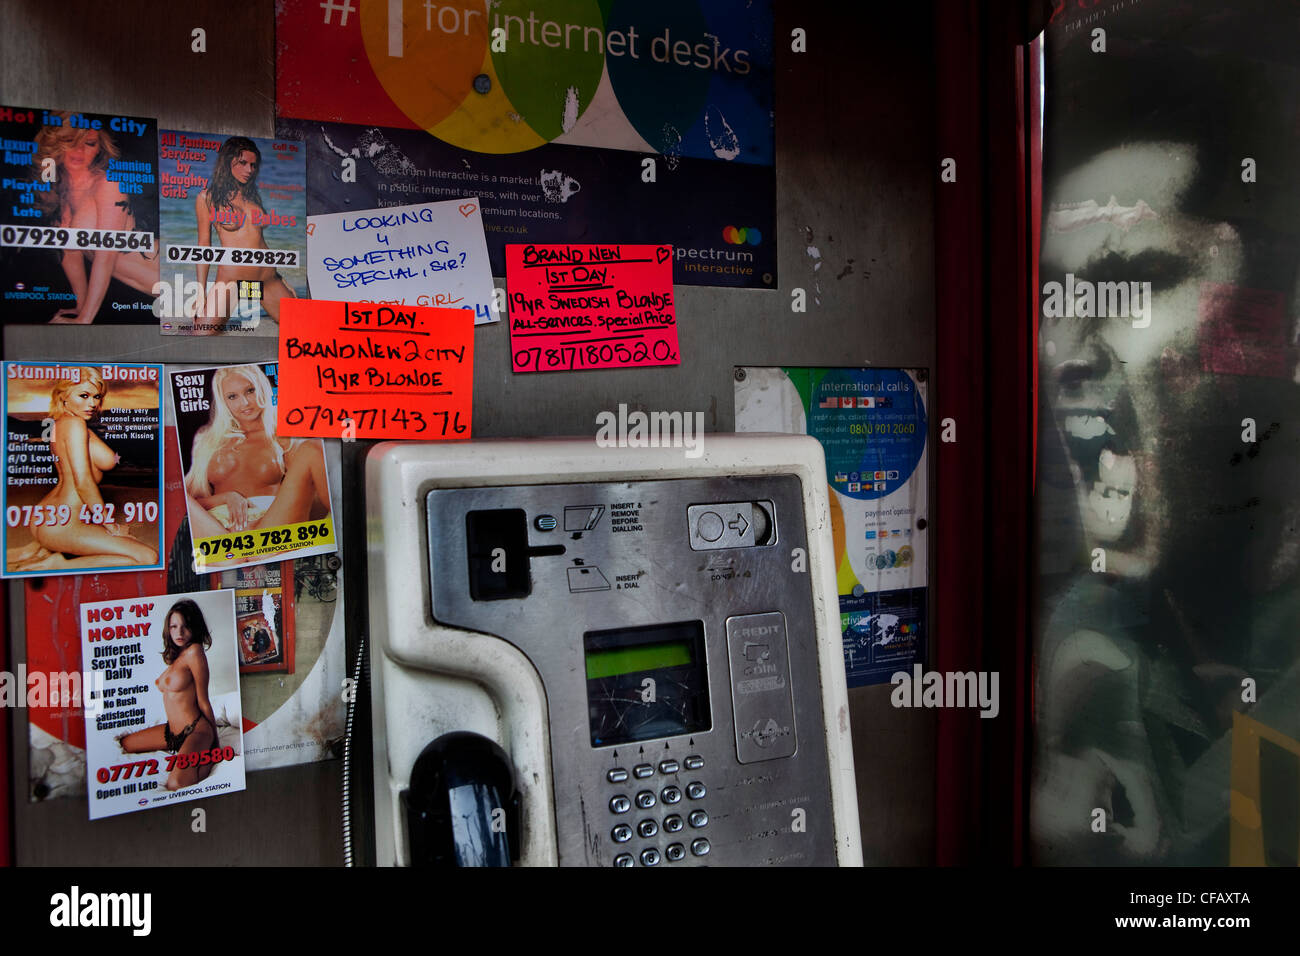 Telephone booth with call girl post cards and face of Mohamed Ali on advert outside. Stock Photo